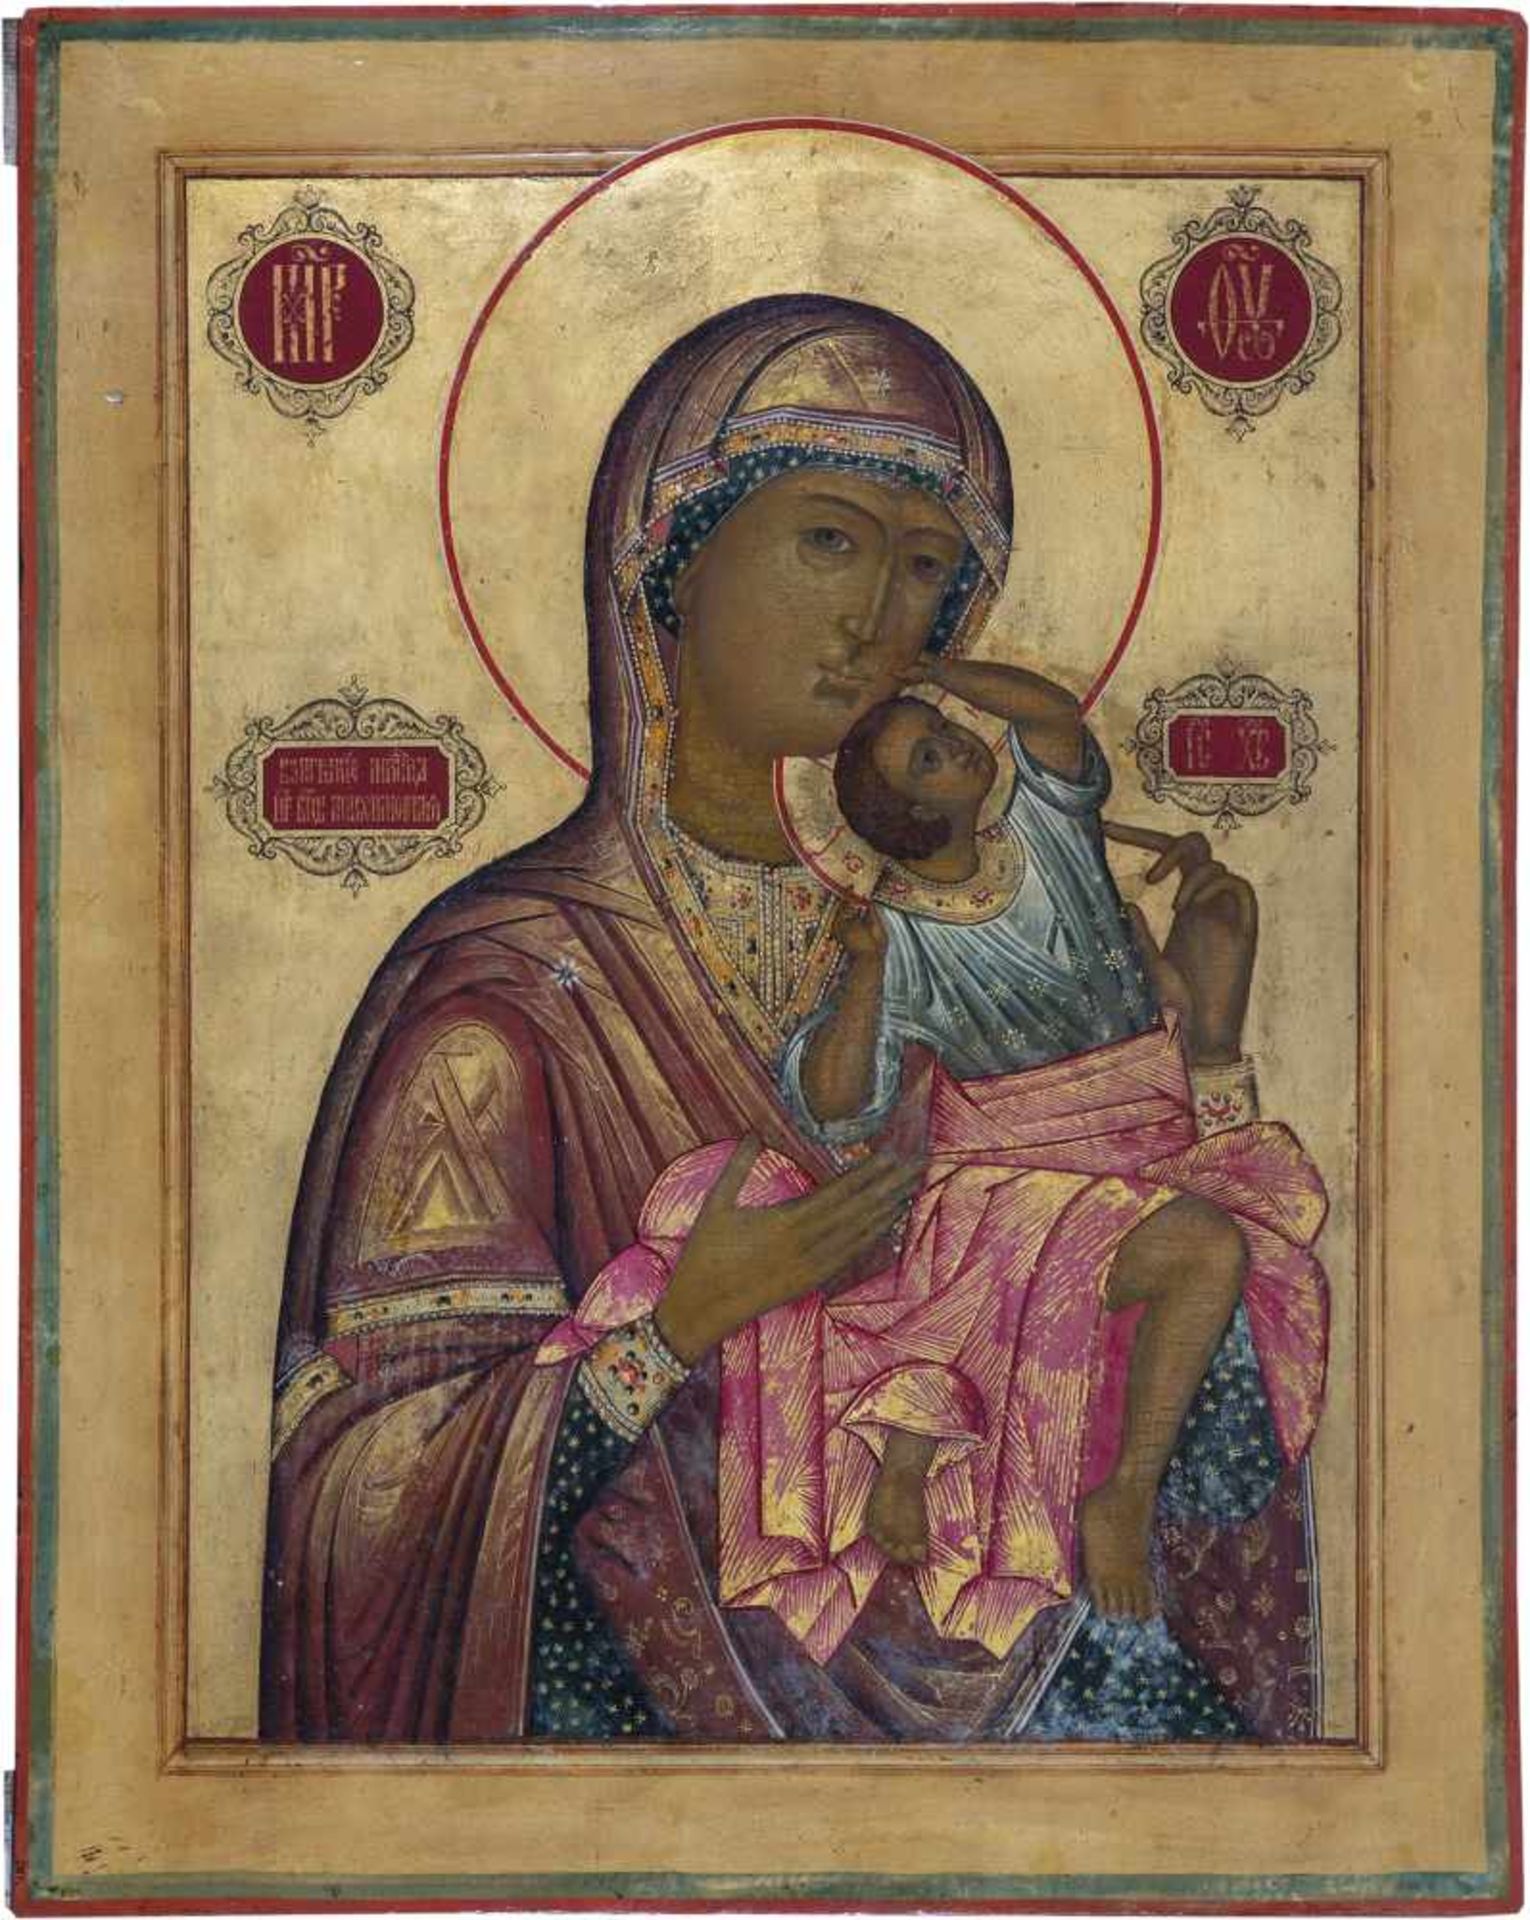 A rare and large icon showing the Mother of God with the playing child Christ. Russia,circa 1900.